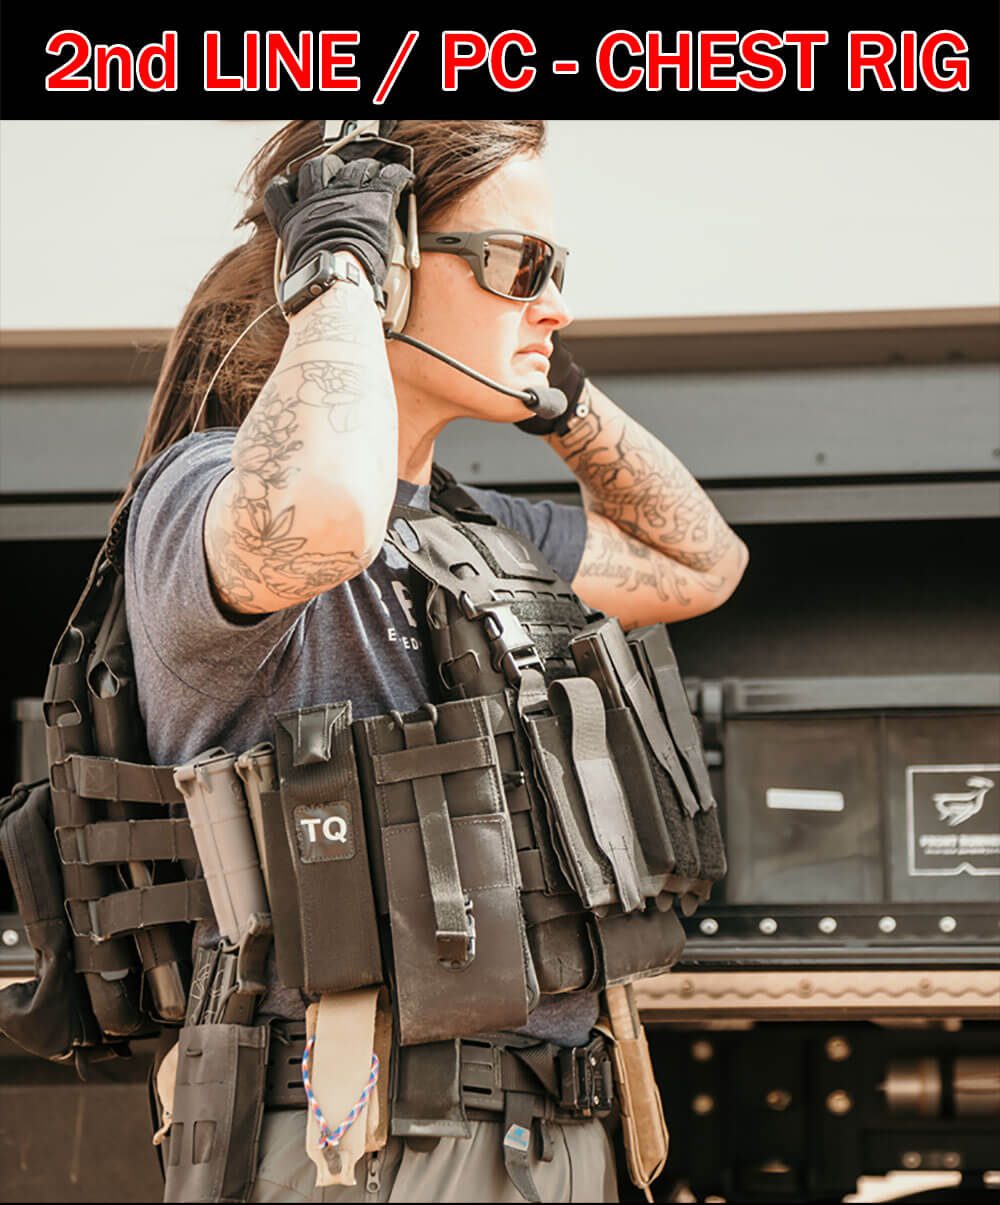 Operator with a CellVault-XL mounted to her chest rig